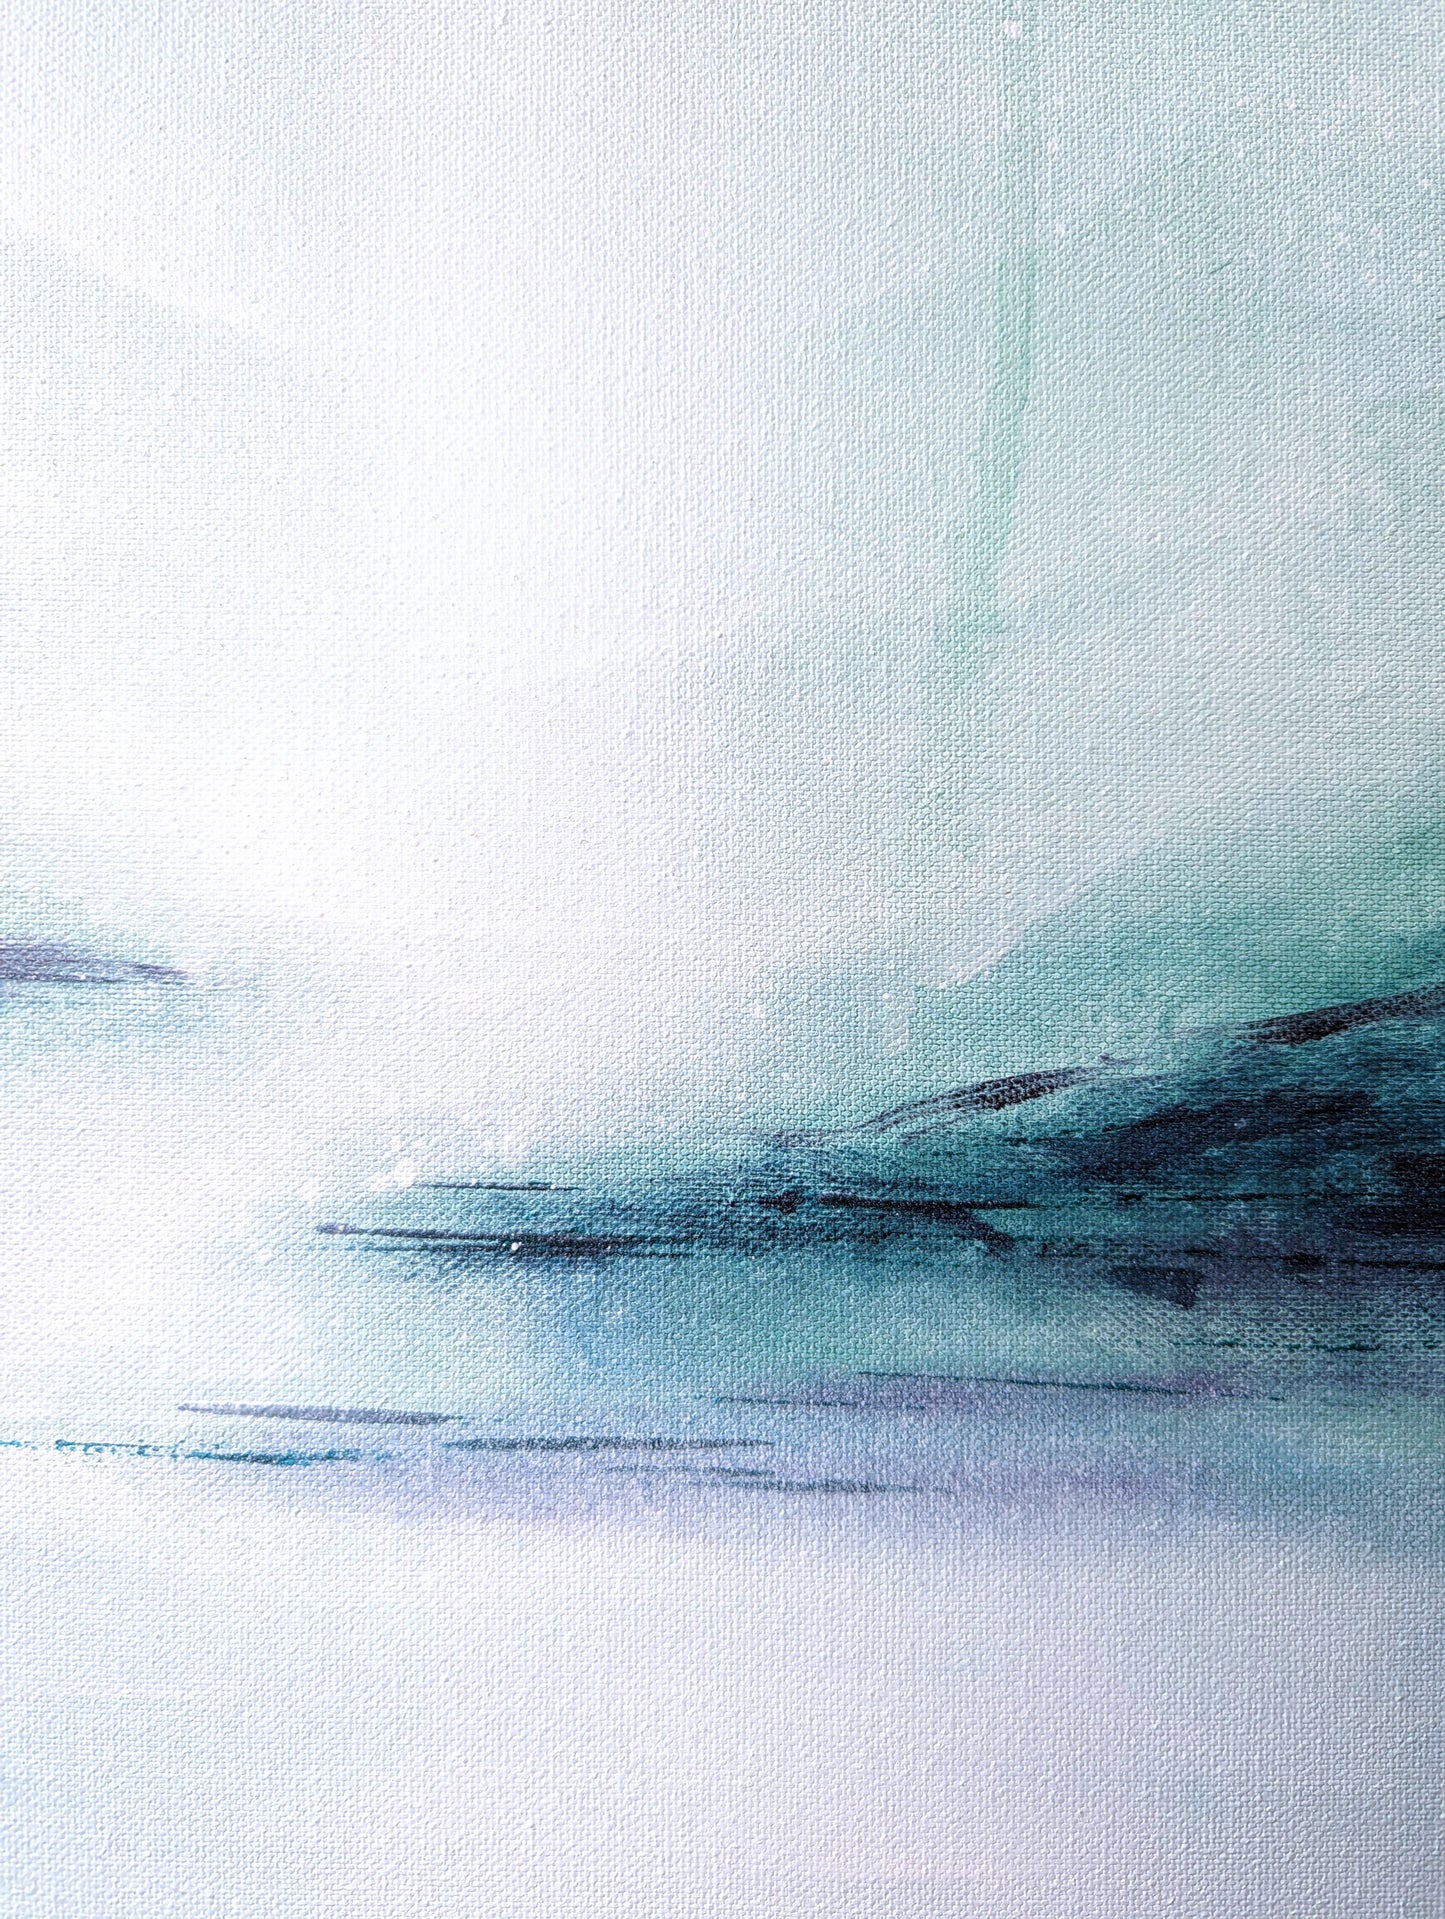 Tranquil Waters 46x55cm